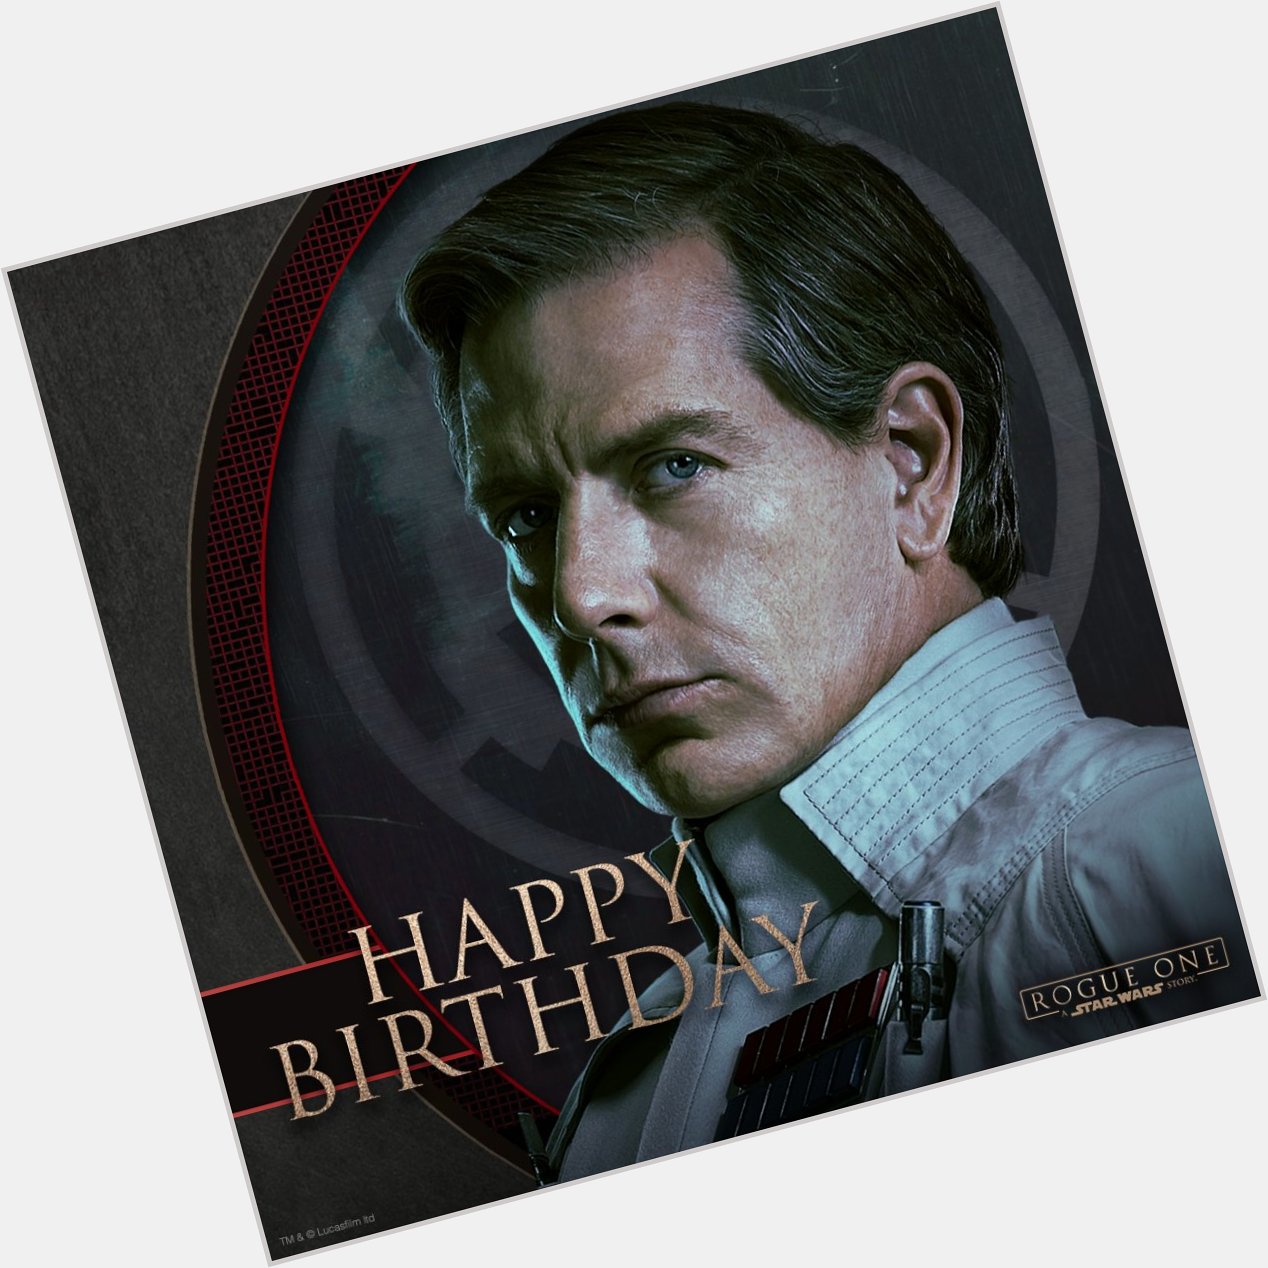 We\re wishing Ben Mendelsohn a Happy Birthday! You will not fail to do the same, leave your wishes below! 